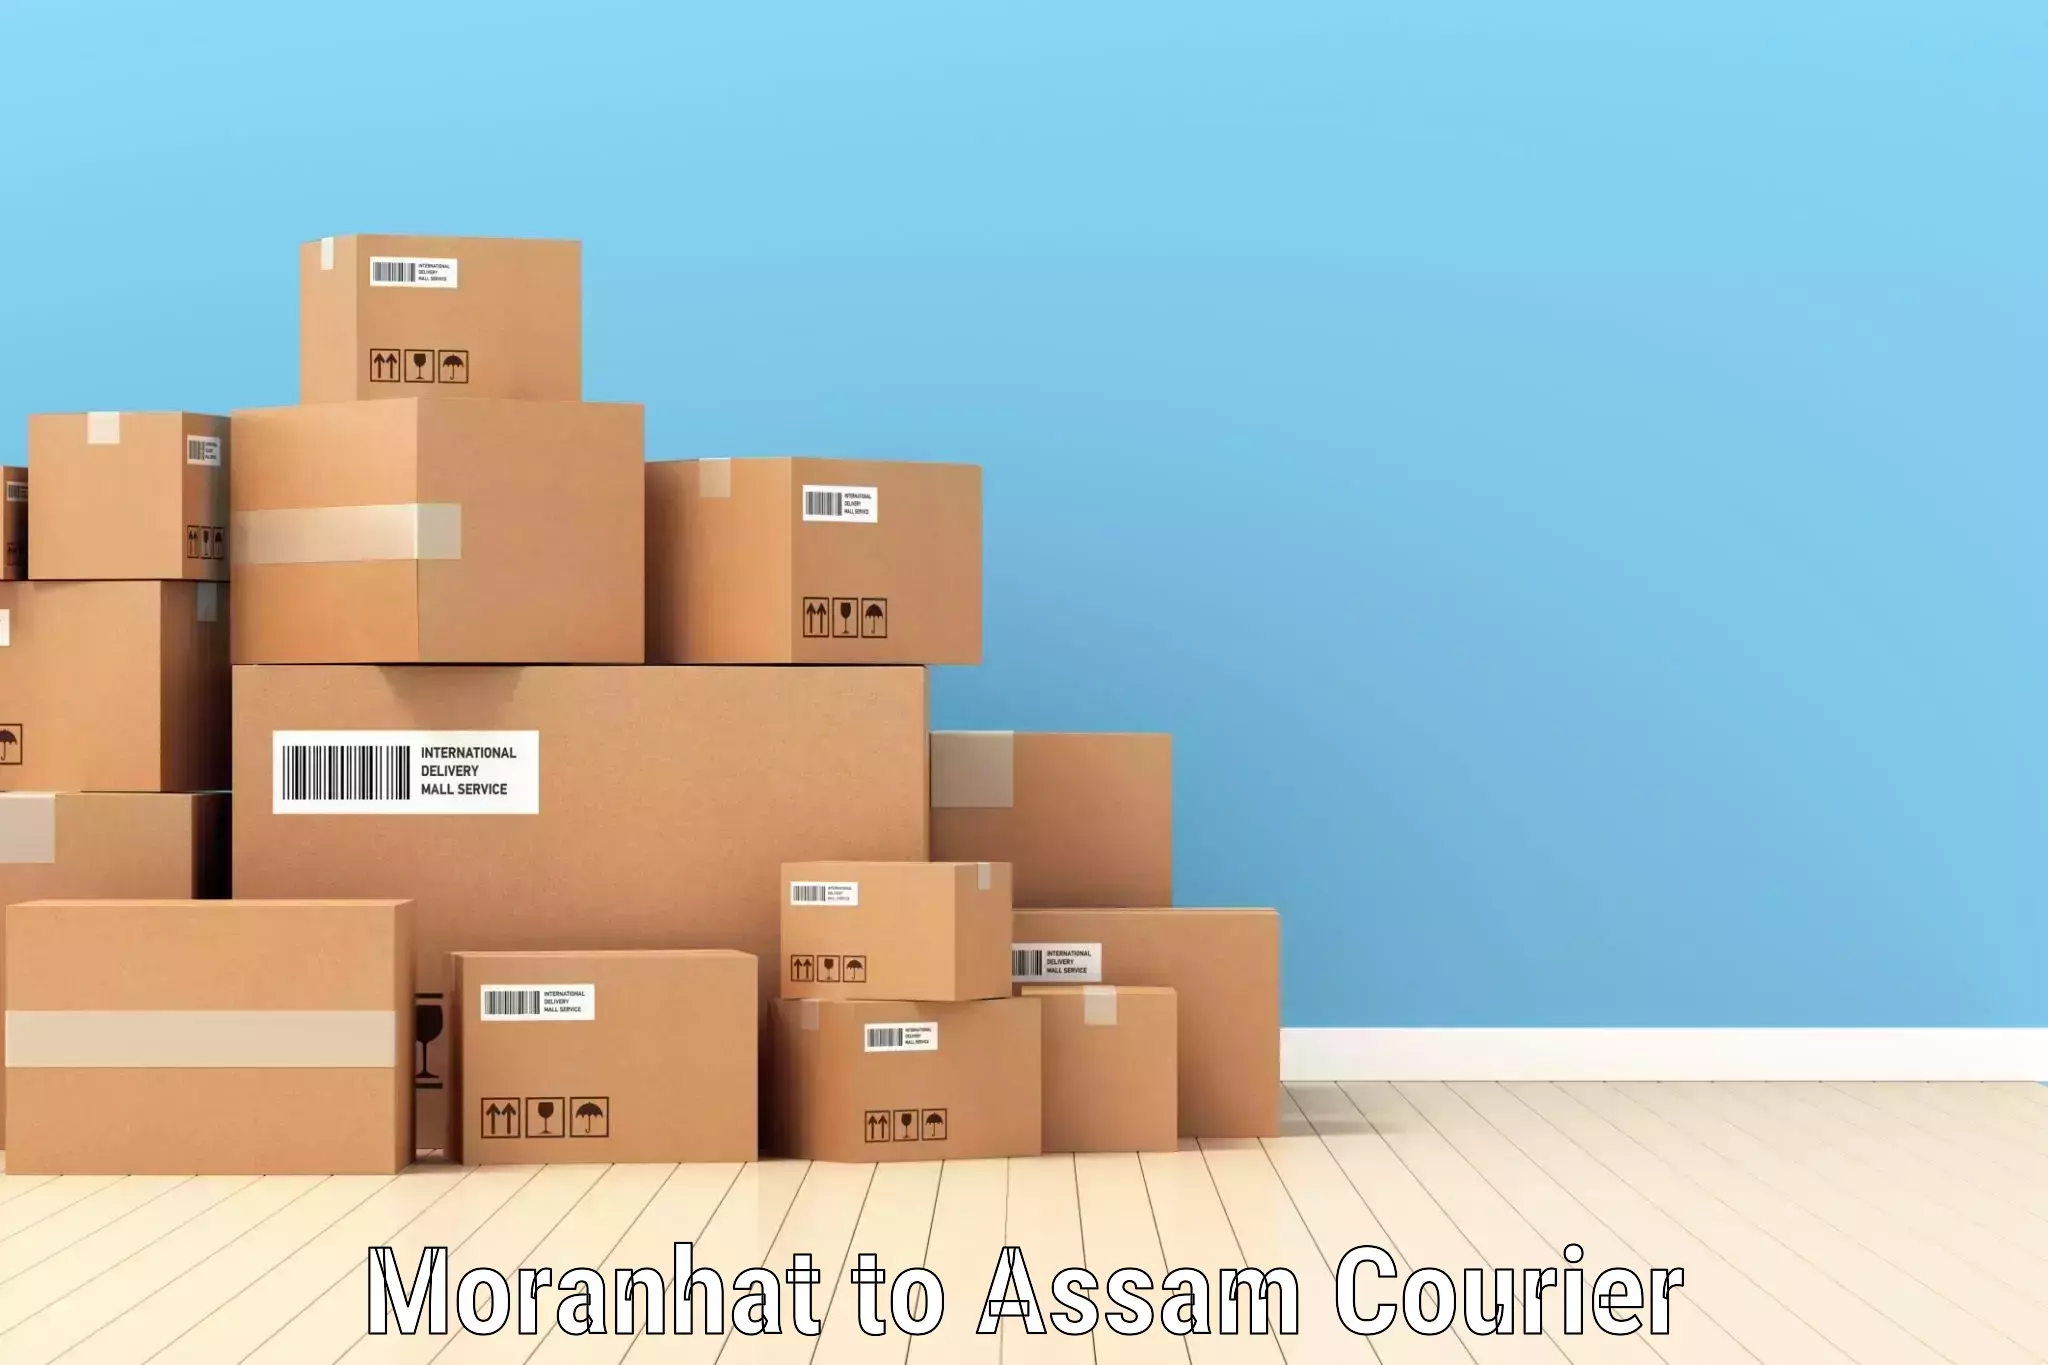 Efficient shipping operations Moranhat to Lala Assam